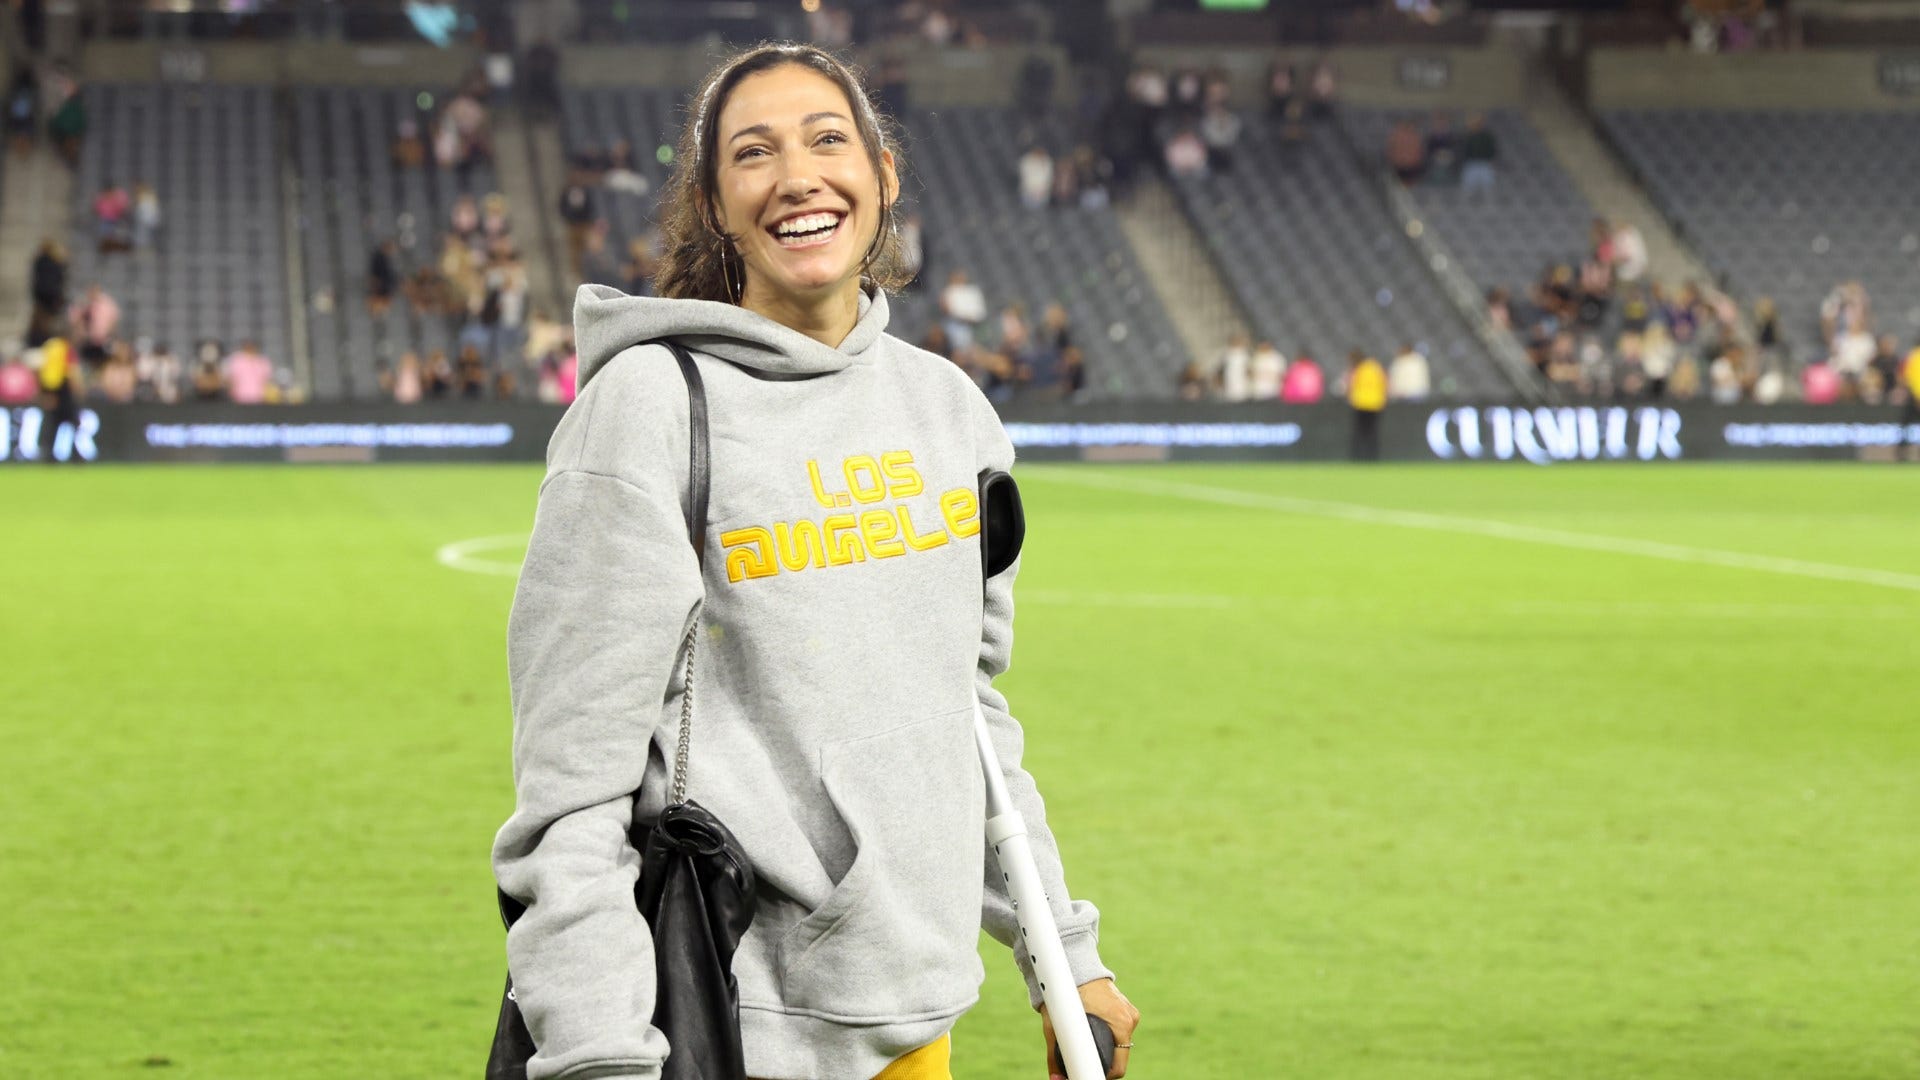 Why did @christenpress strip down to her sports bra on the field after the  game last night? Because a fan …